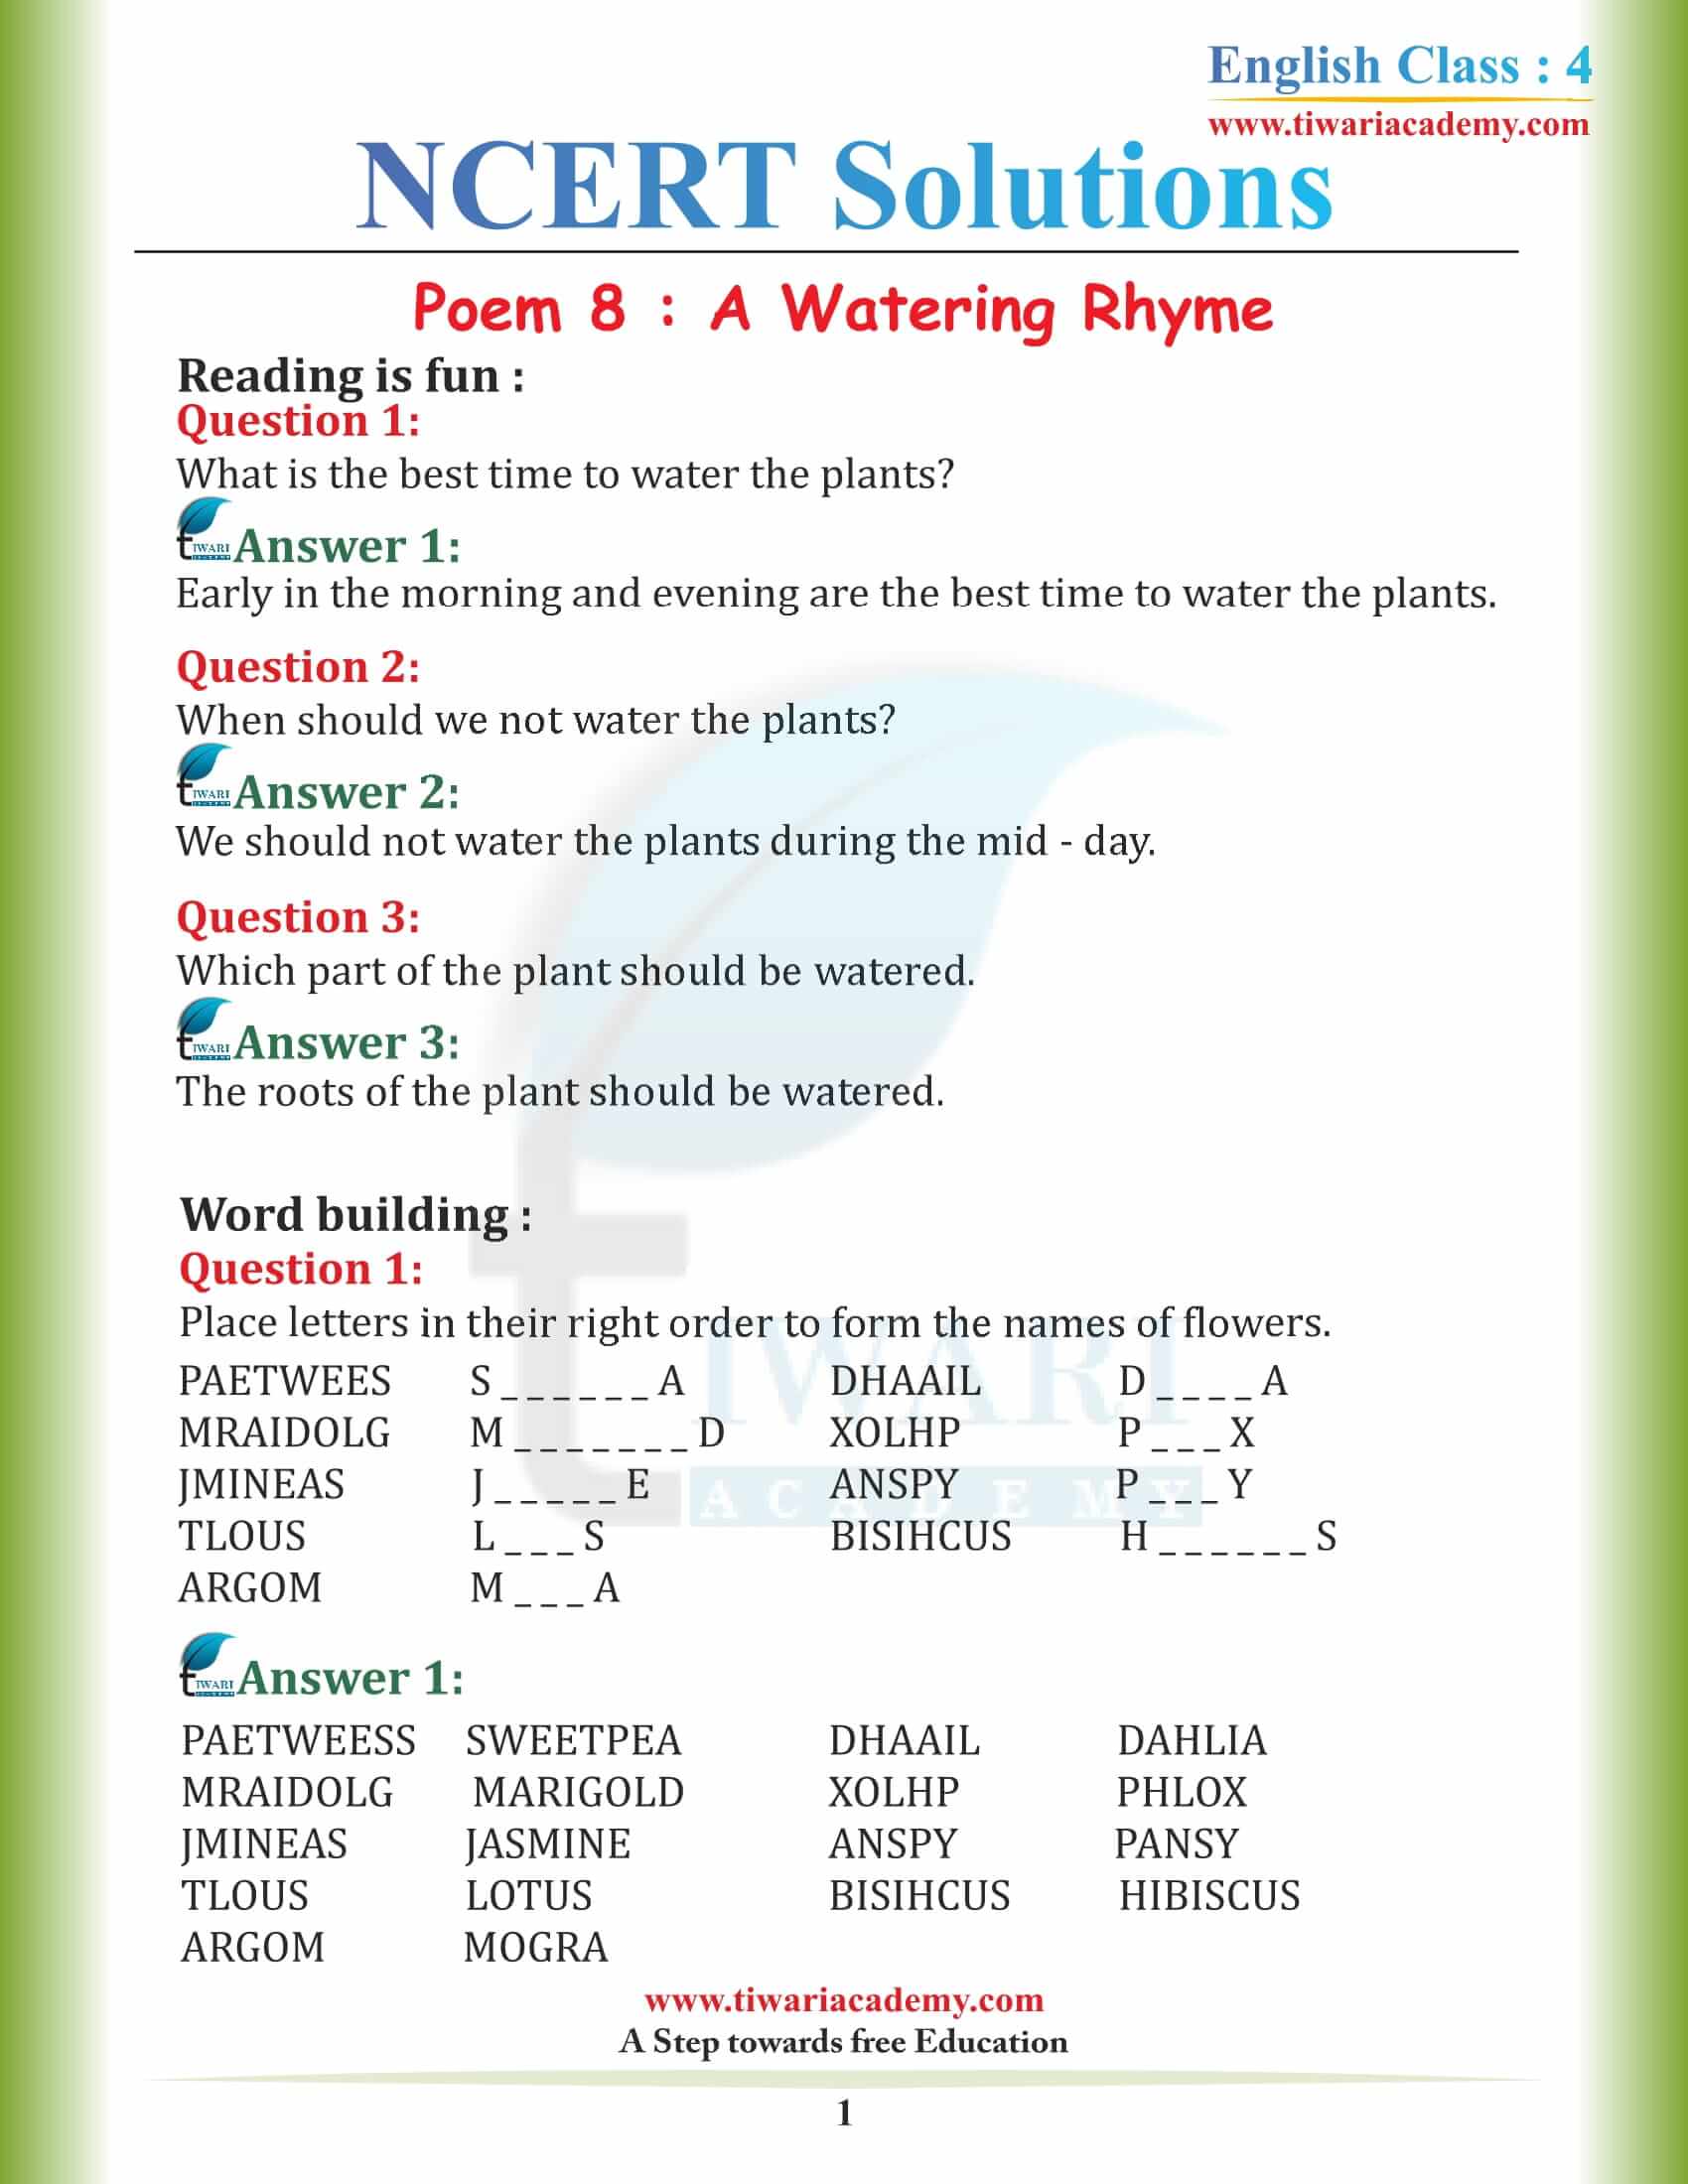 NCERT Solutions for Class 4 English Unit 8 Chapter 1 A Watering Rhyme